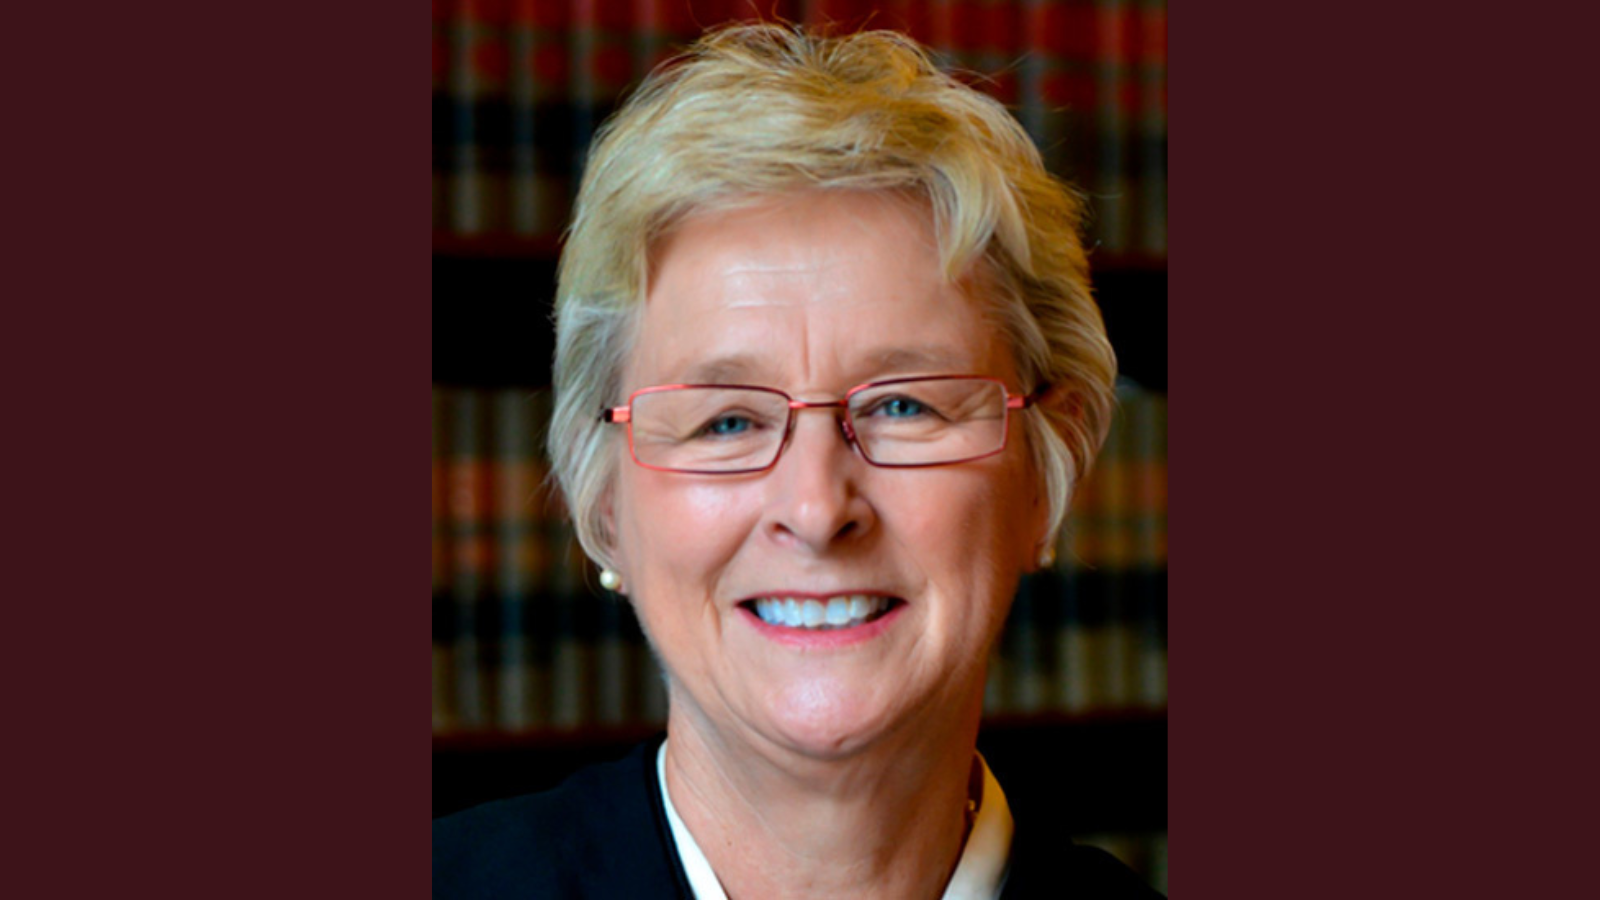 Justice Ann Walsh Bradley not seeking re-election to state Supreme Court